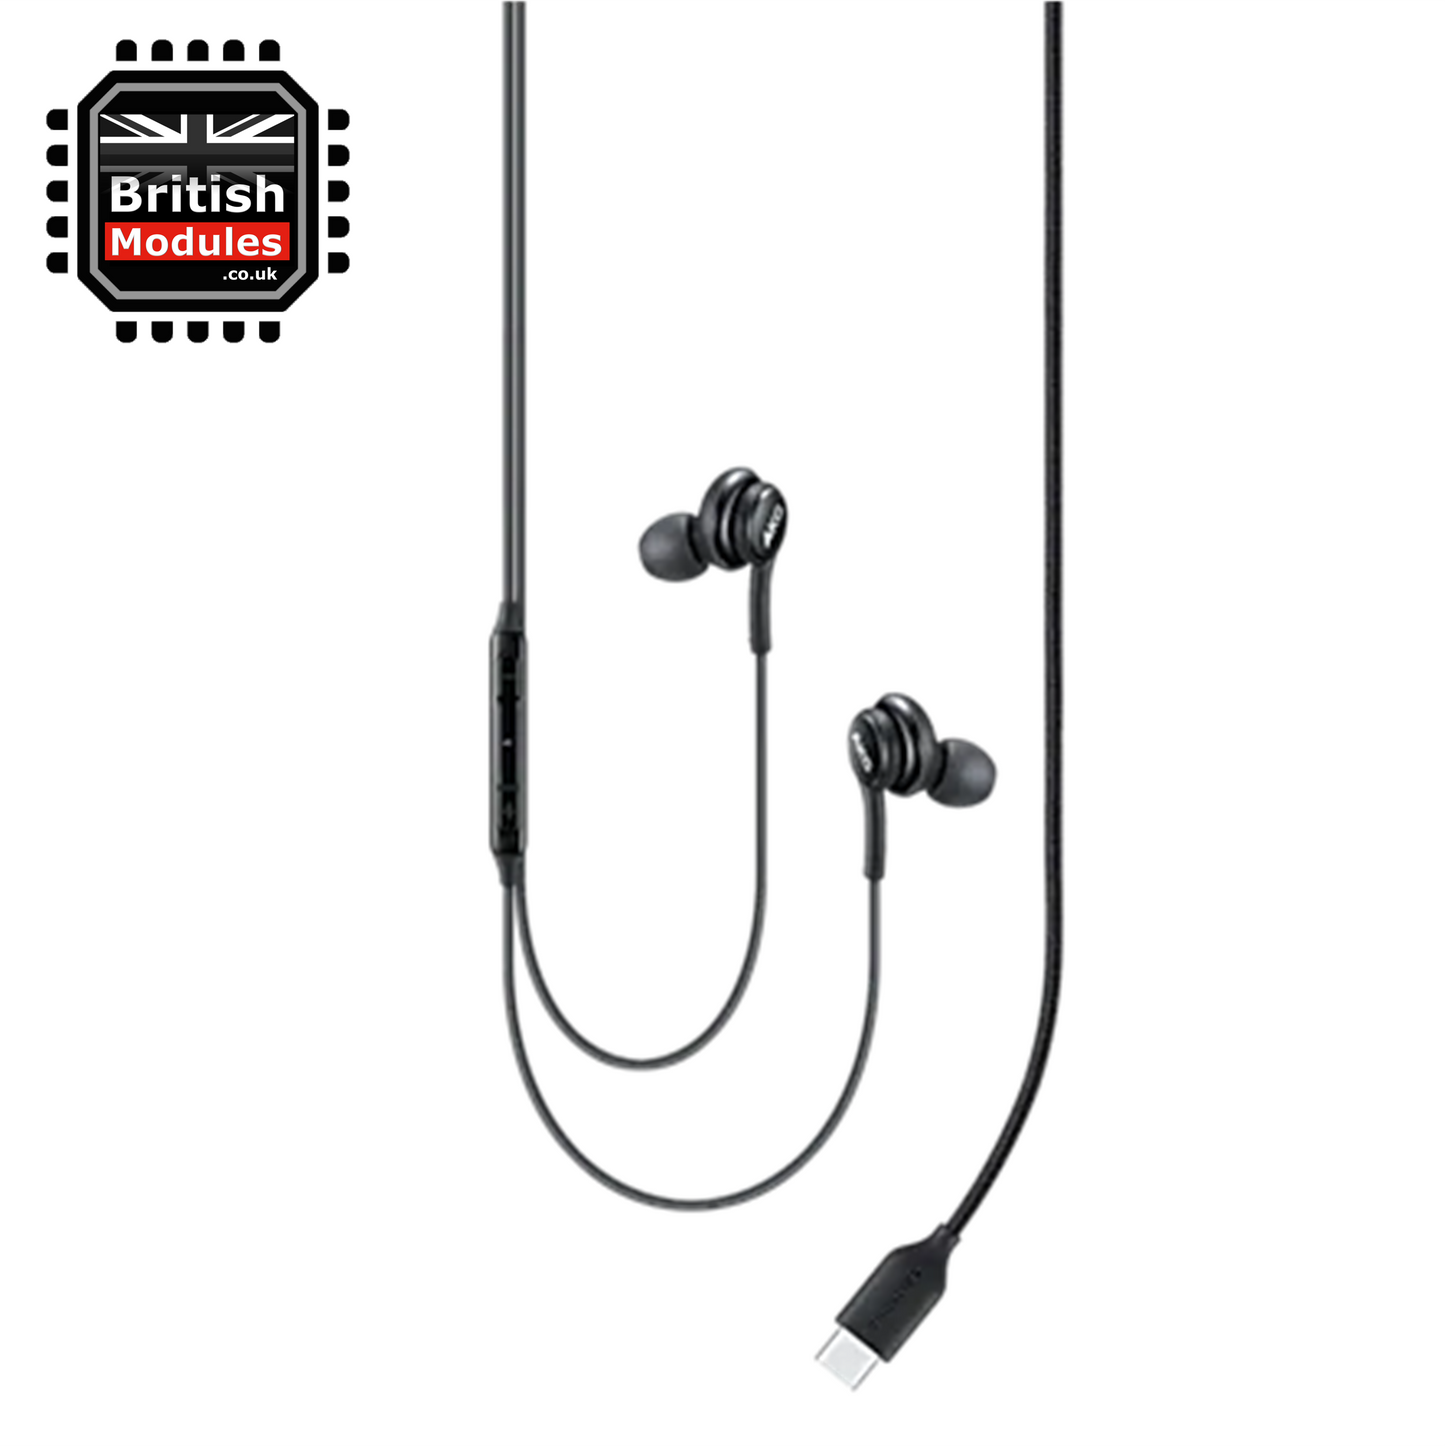 Samsung USB Type-C Earphones Headphones Earbuds Wired Microphone and Volume Control Tuned by AKG Black